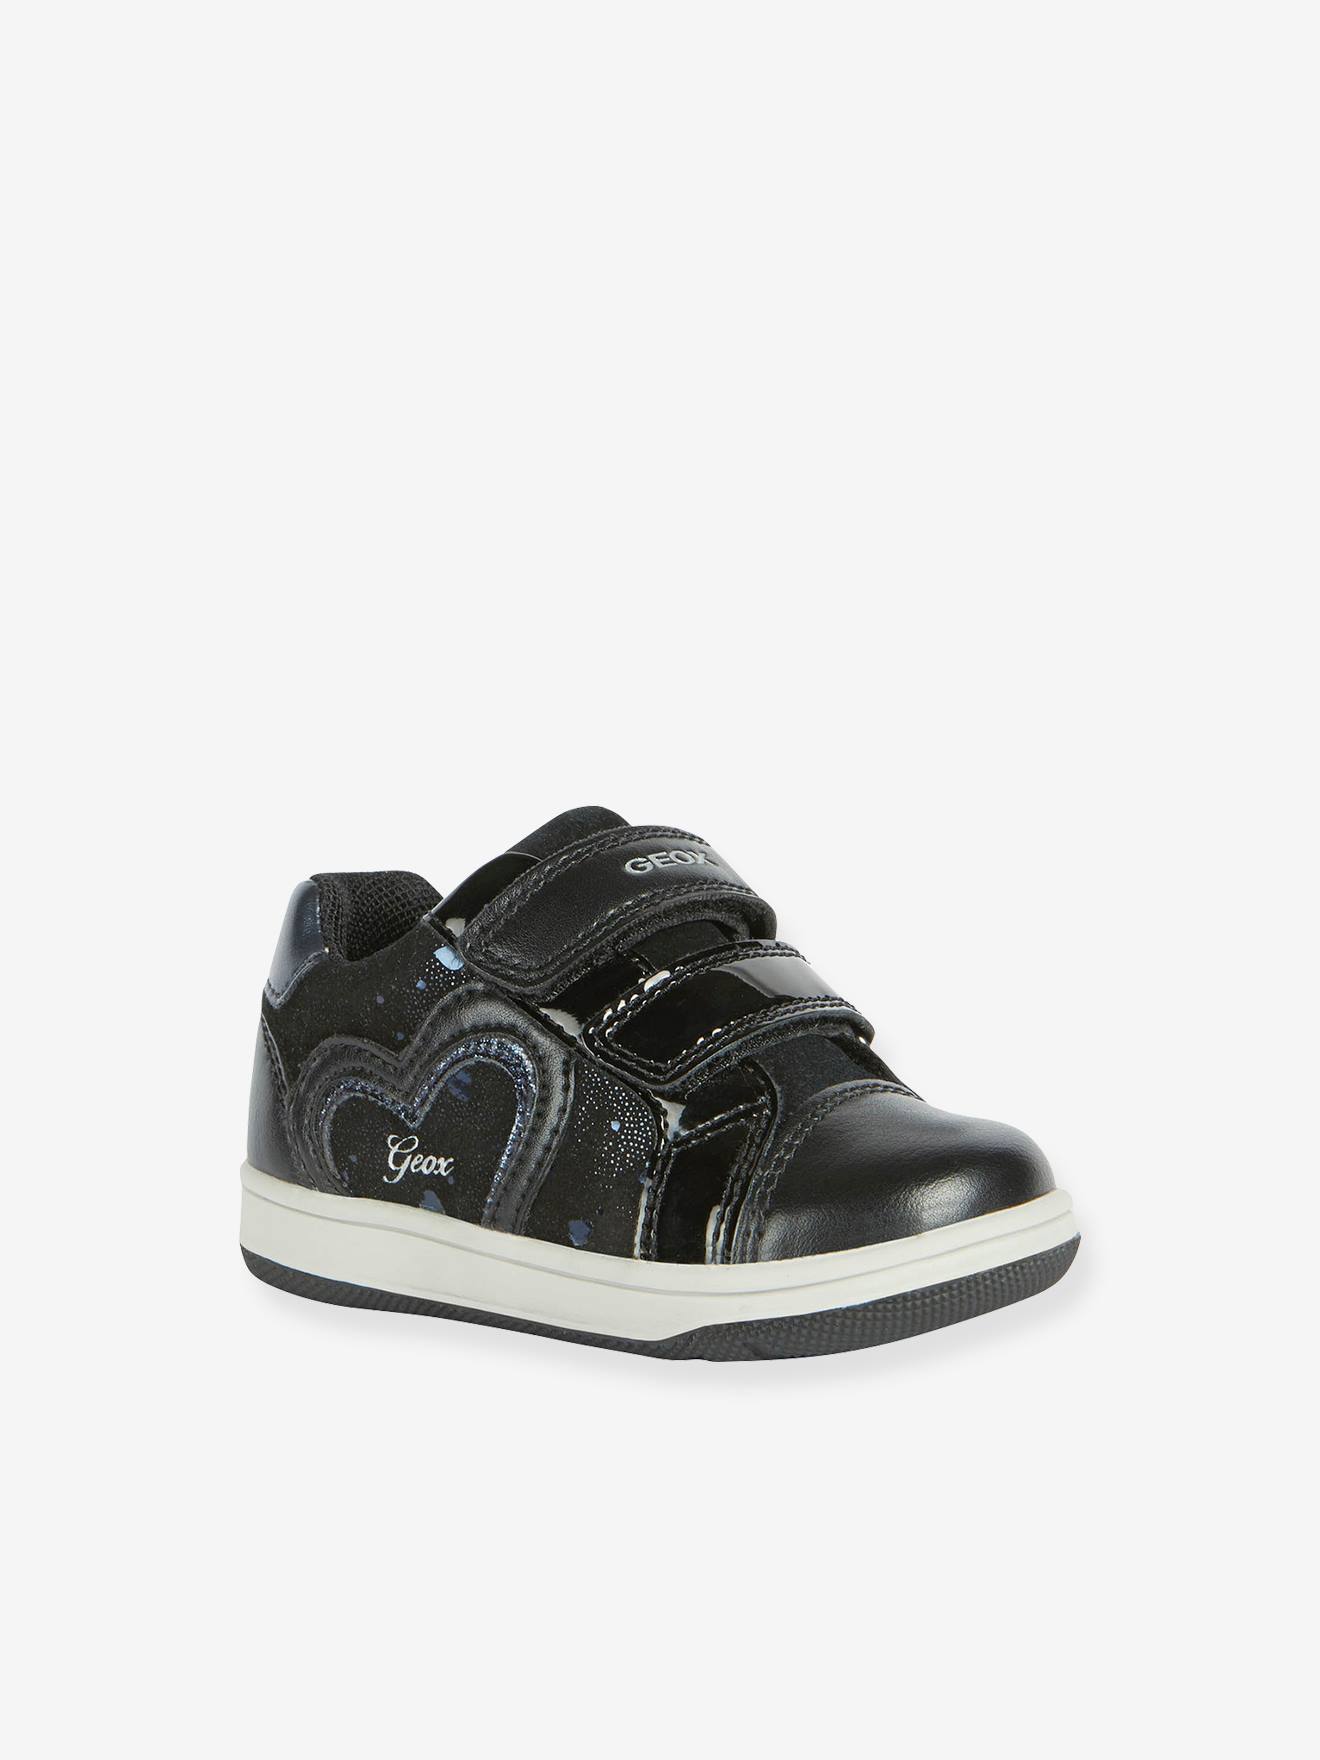 baby black trainers